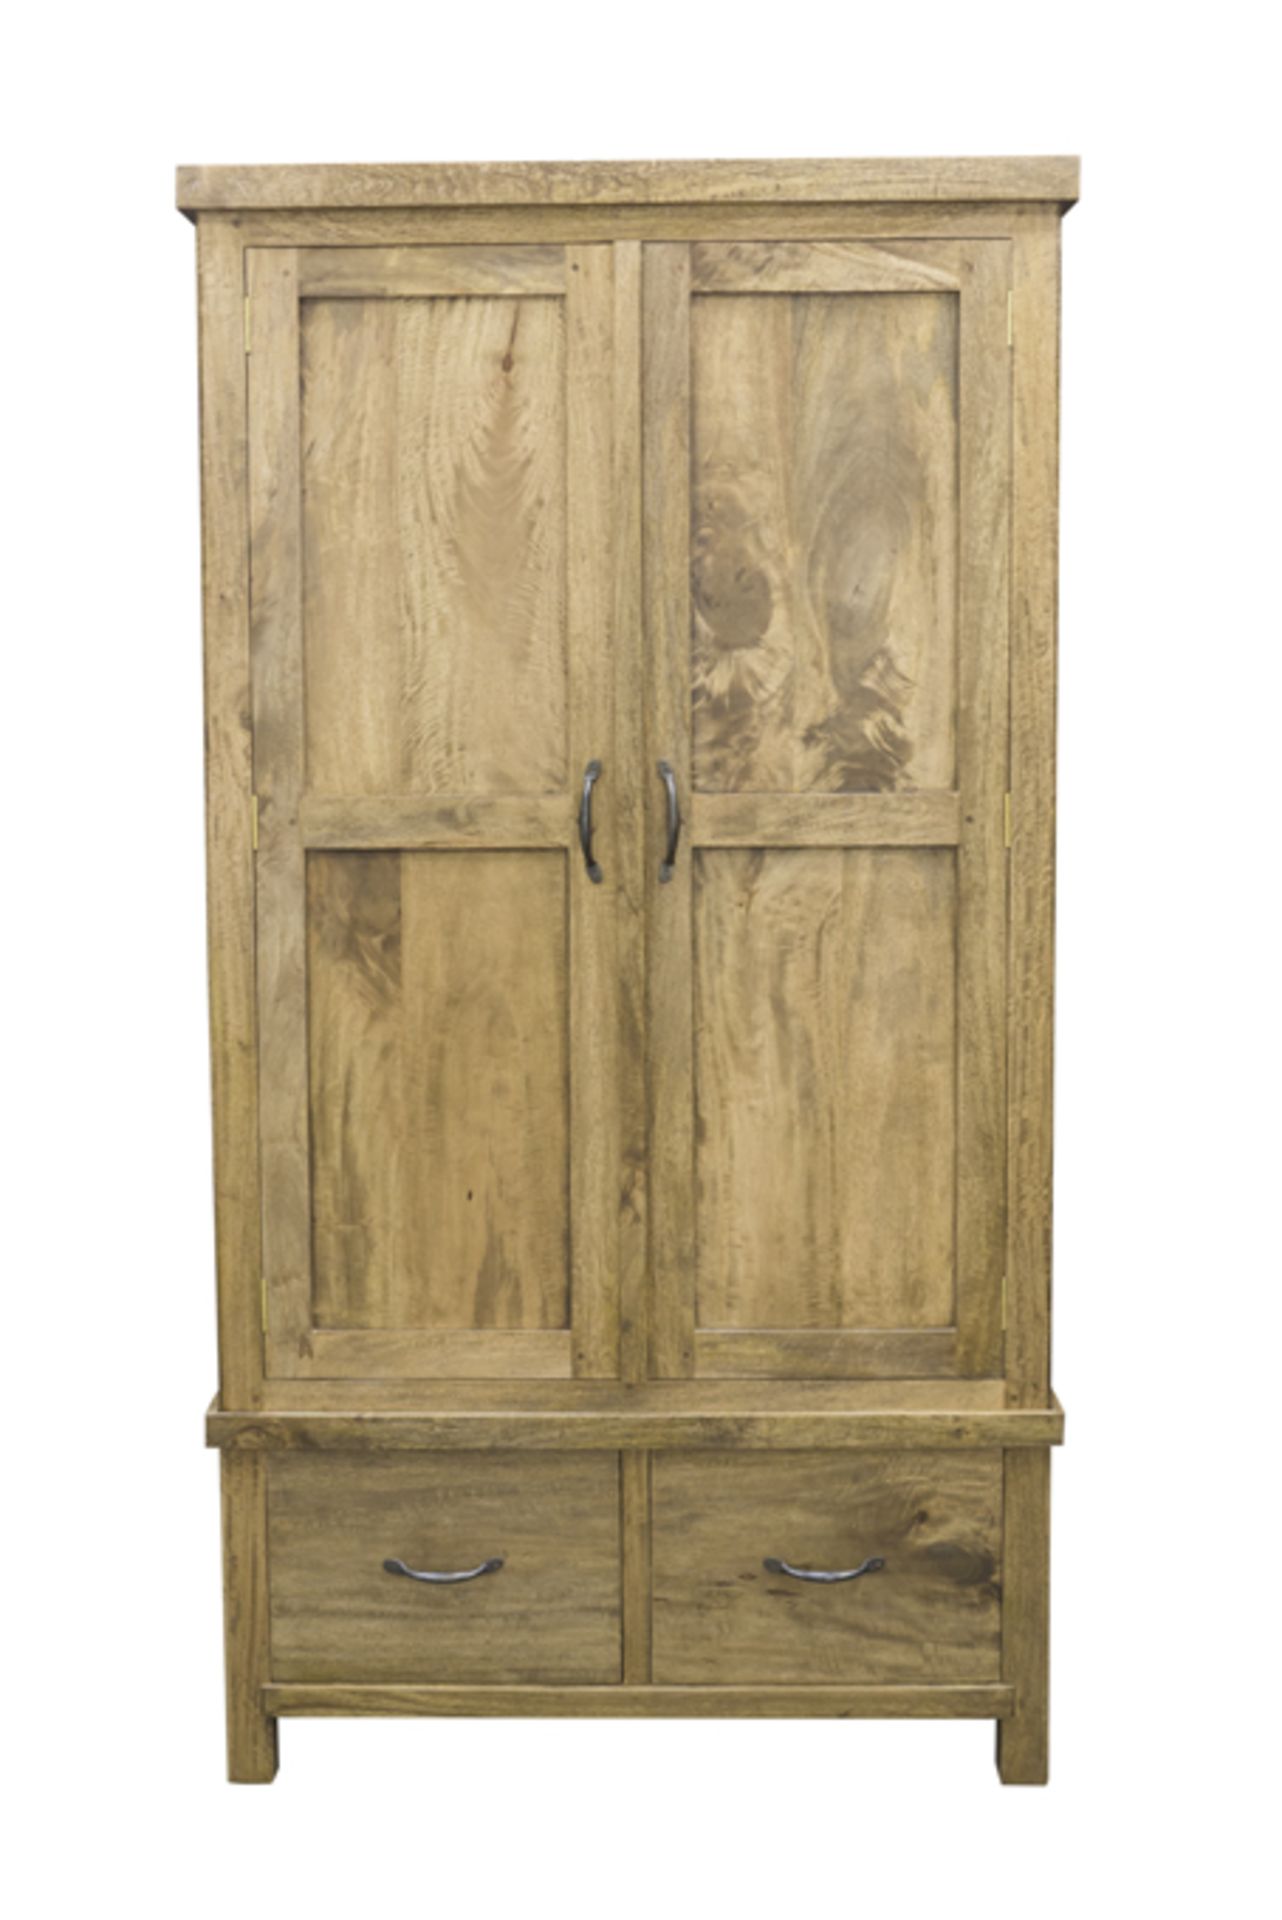 Soho Solid Wood Wardrobe This Wardrobe will look stunning in your bedroom, especially when combined